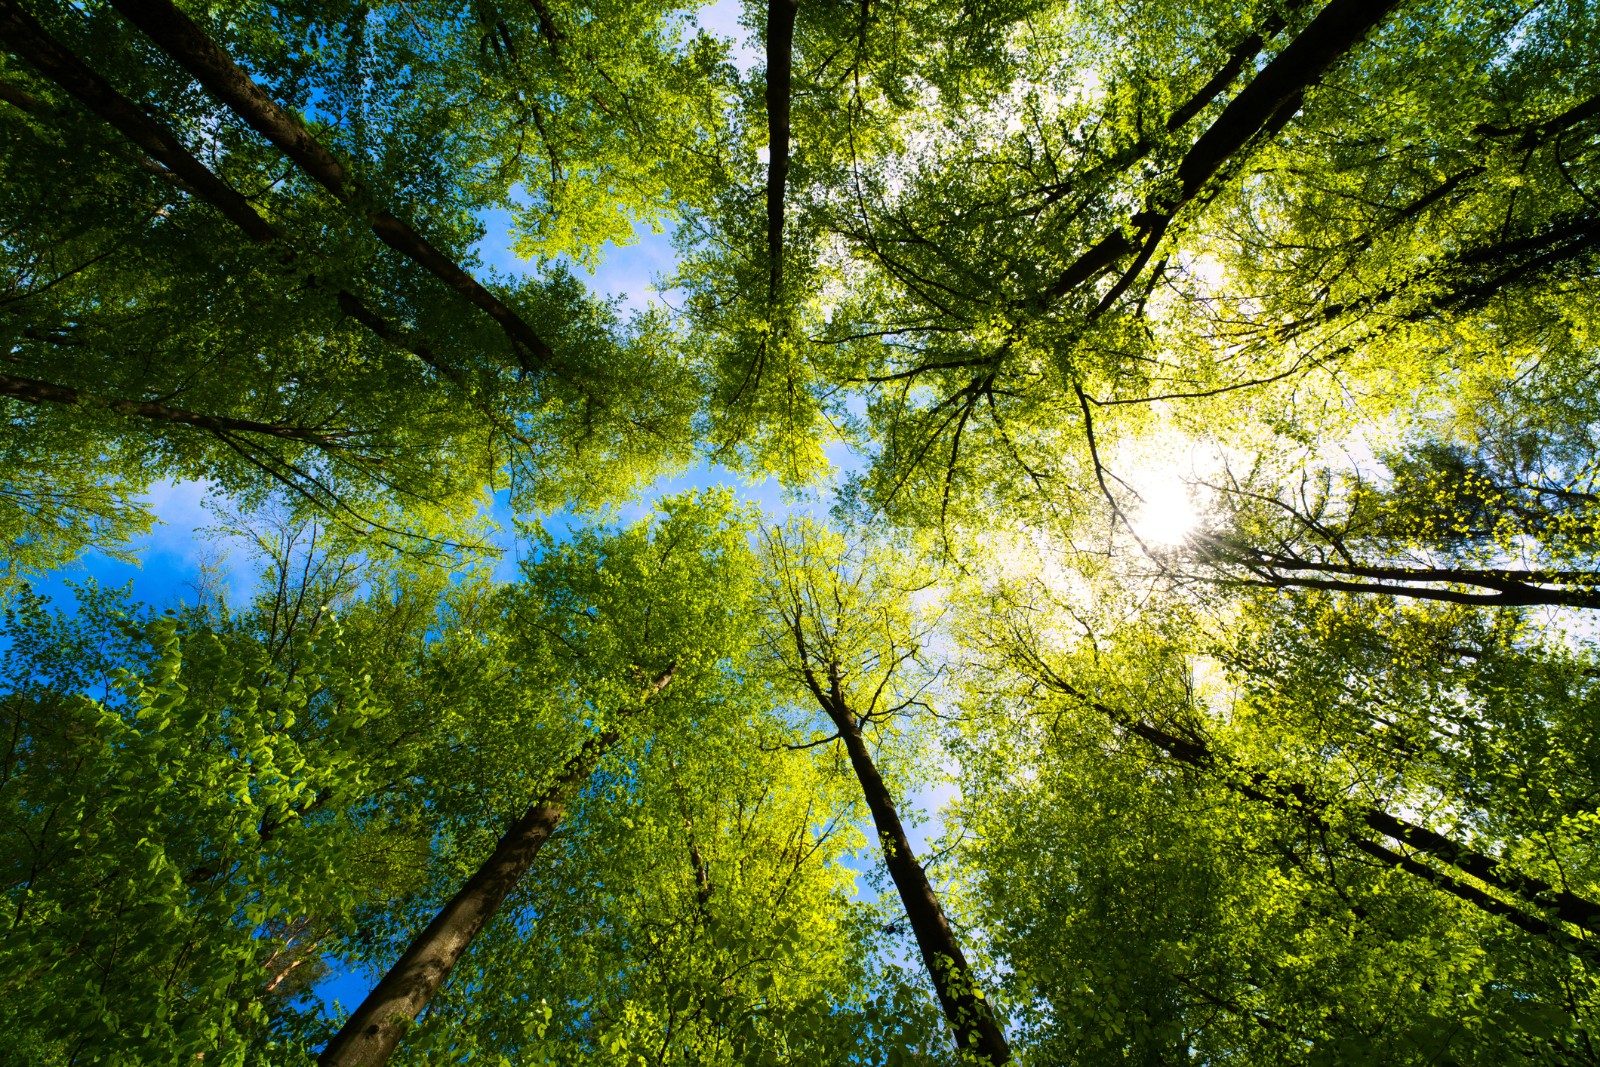 Upward view of trees against the sky representing impact of natural gas sustainability.